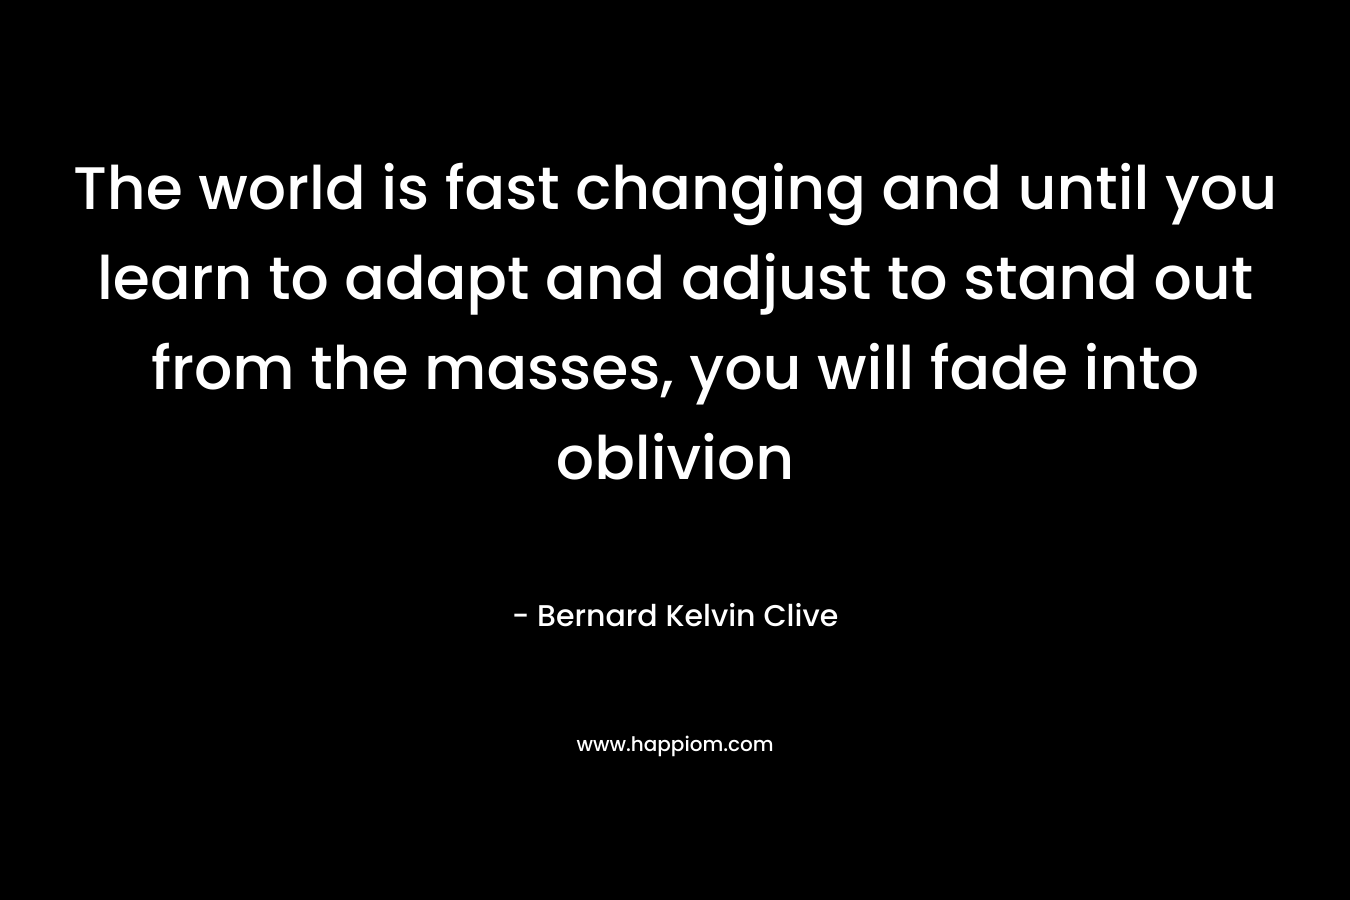 The world is fast changing and until you learn to adapt and adjust to stand out from the masses, you will fade into oblivion – Bernard Kelvin Clive